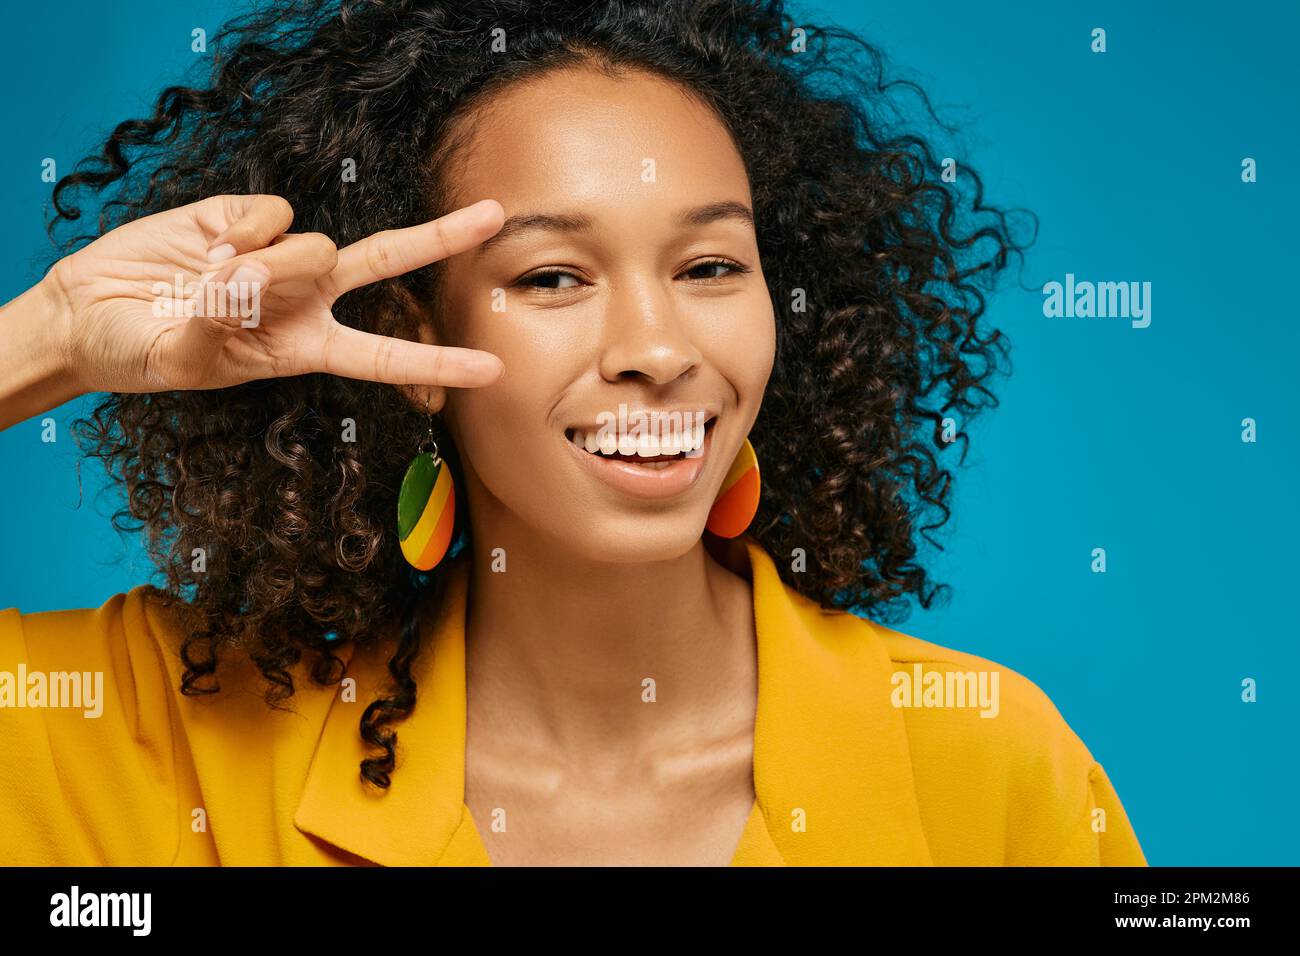 Studio portrait of joyful curly African American woman wearing hipster clothing showing v-sign near her face on blue background Stock Photo